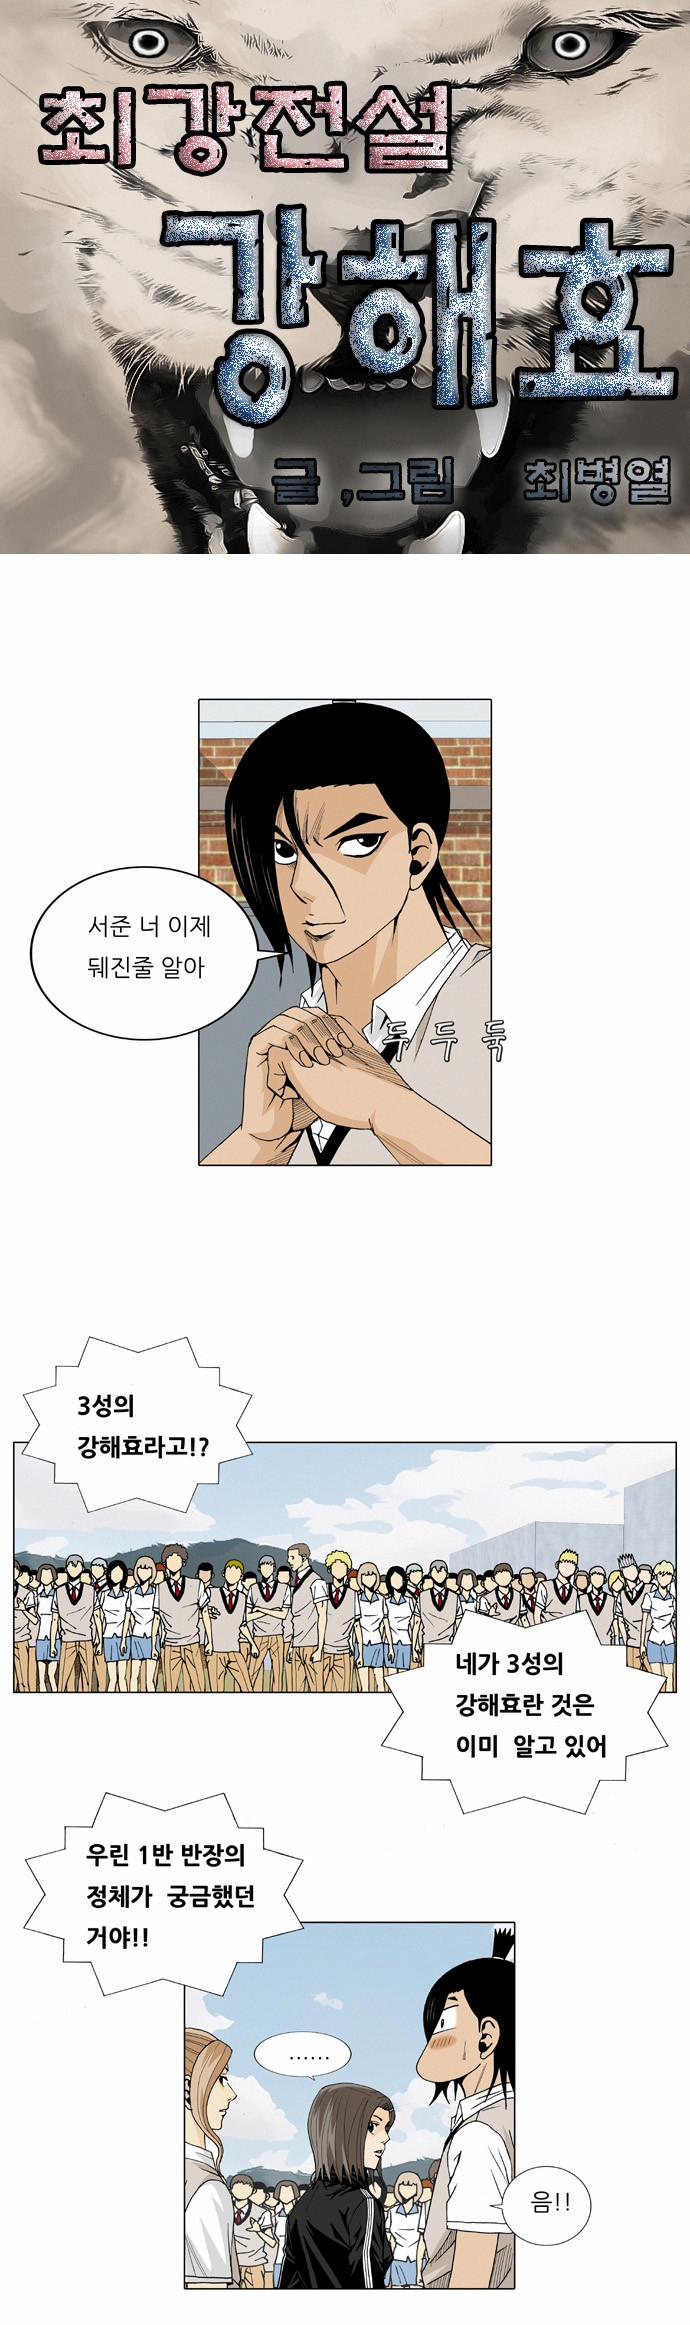 Ultimate Legend - Kang Hae Hyo - Chapter 22 - Page 3